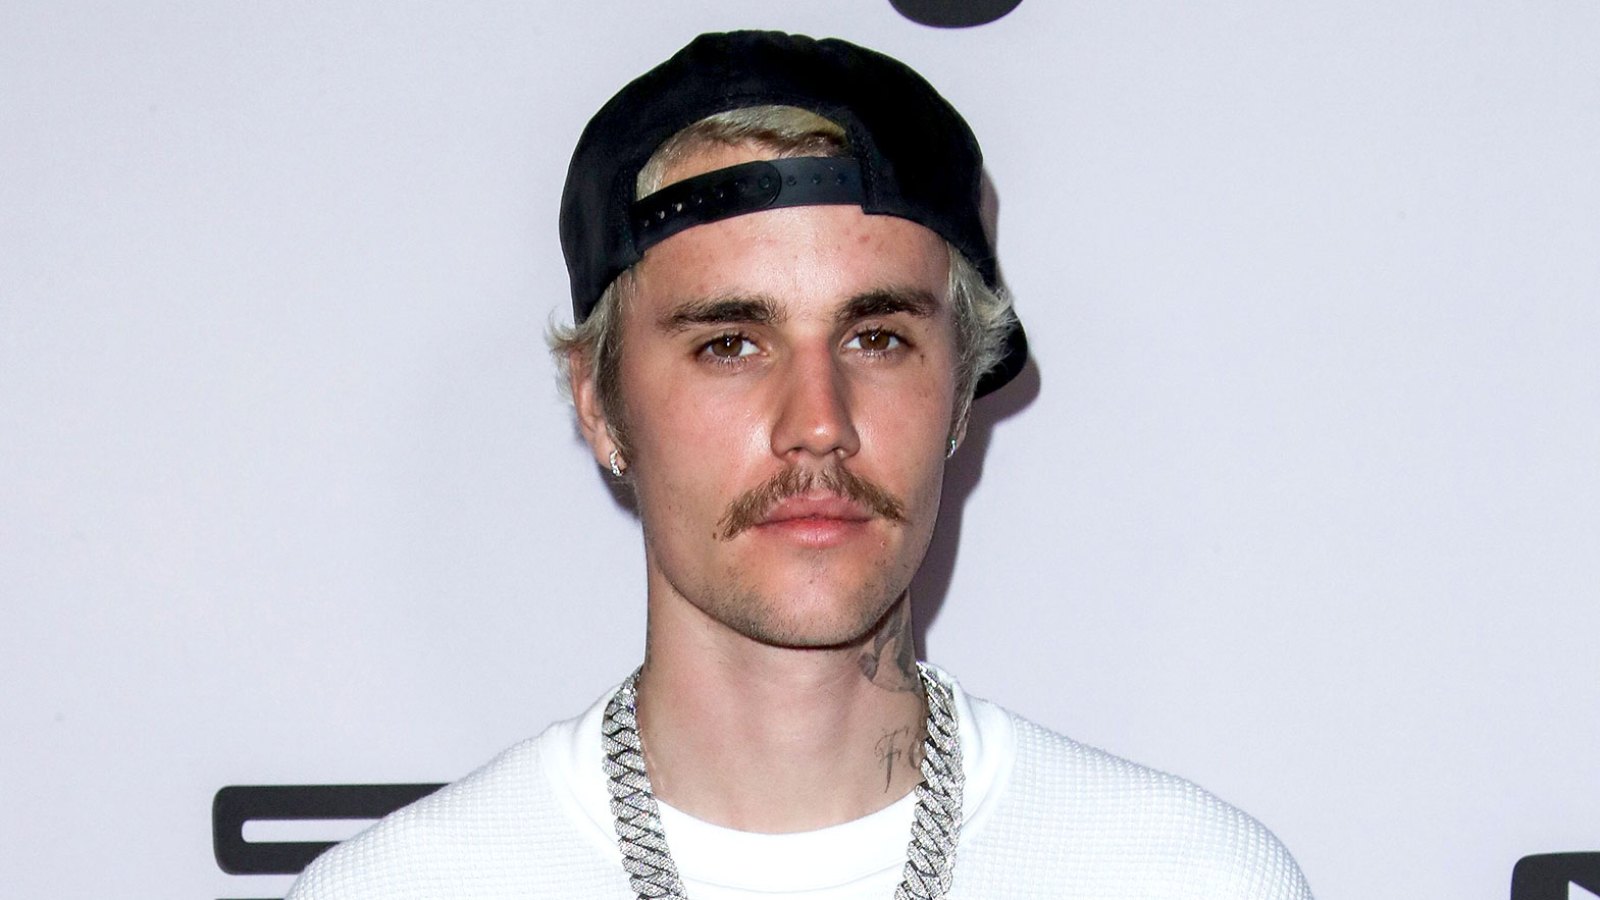 Justin Bieber Reveals He’s Suffering From Ramsay Hunt Syndrome Leaving Half His Face Paralyzed